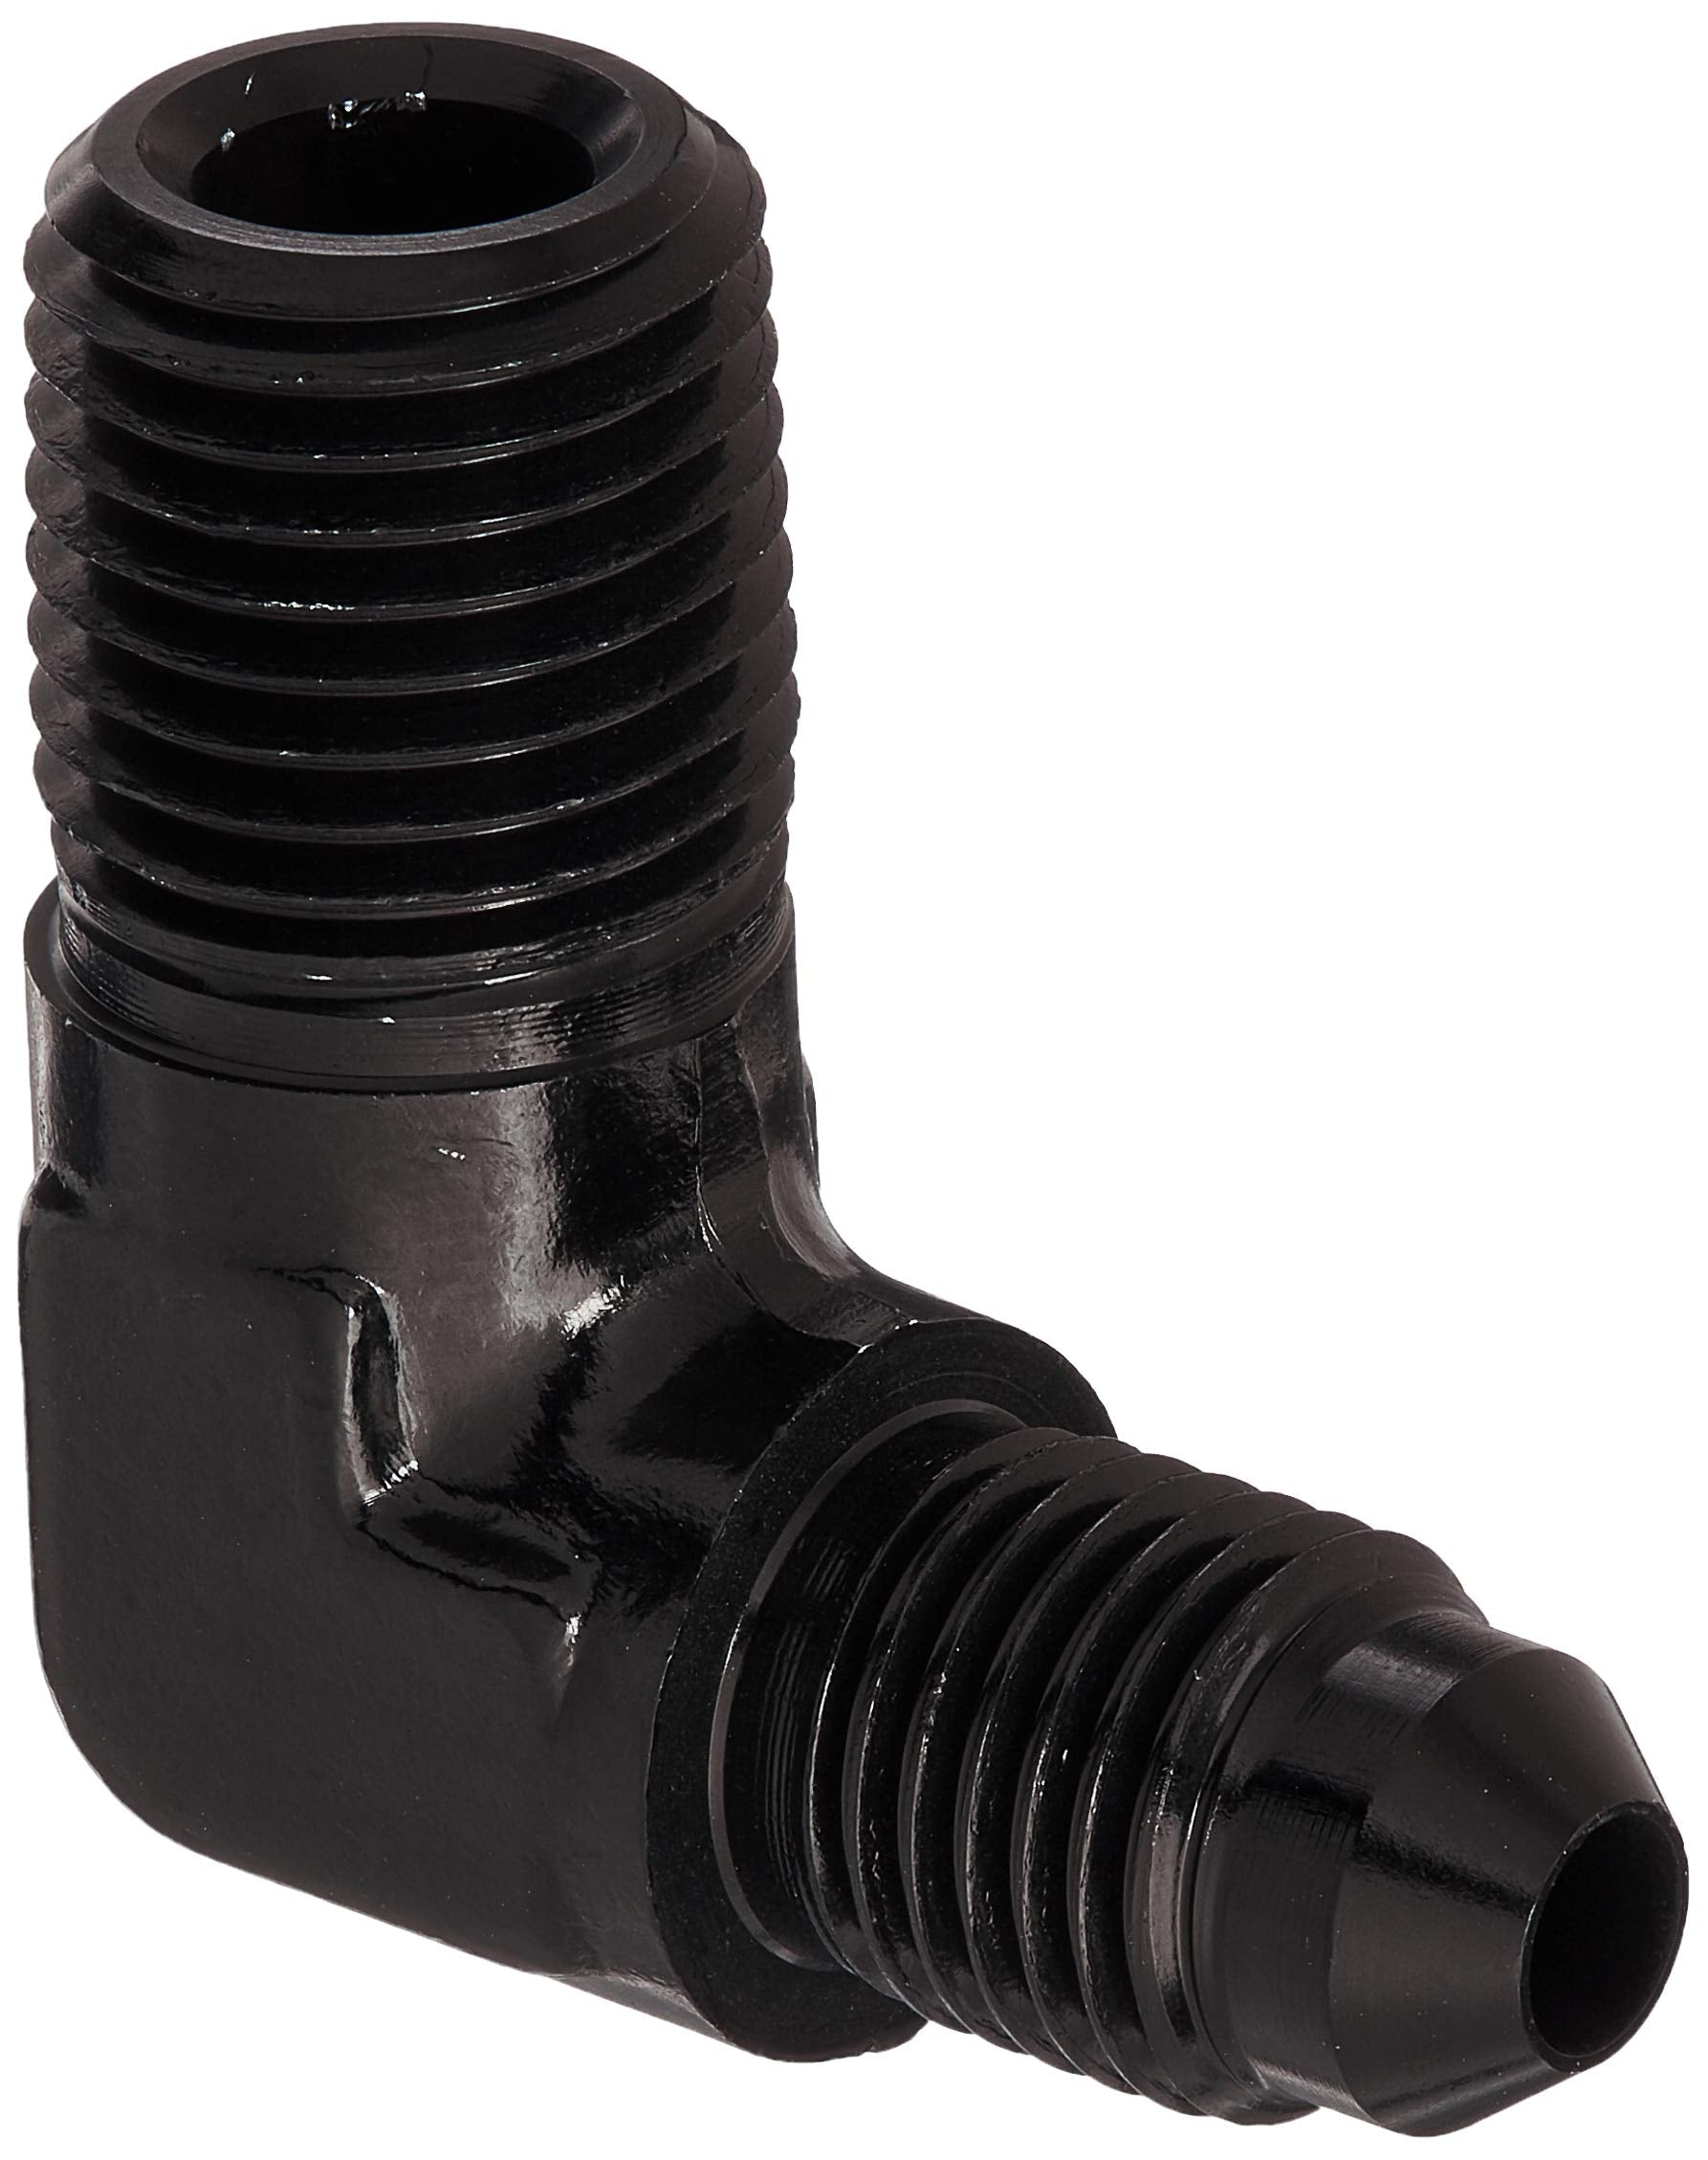 Aeroquip FCM5032 90 Degree Male AN to Pipe Adapter